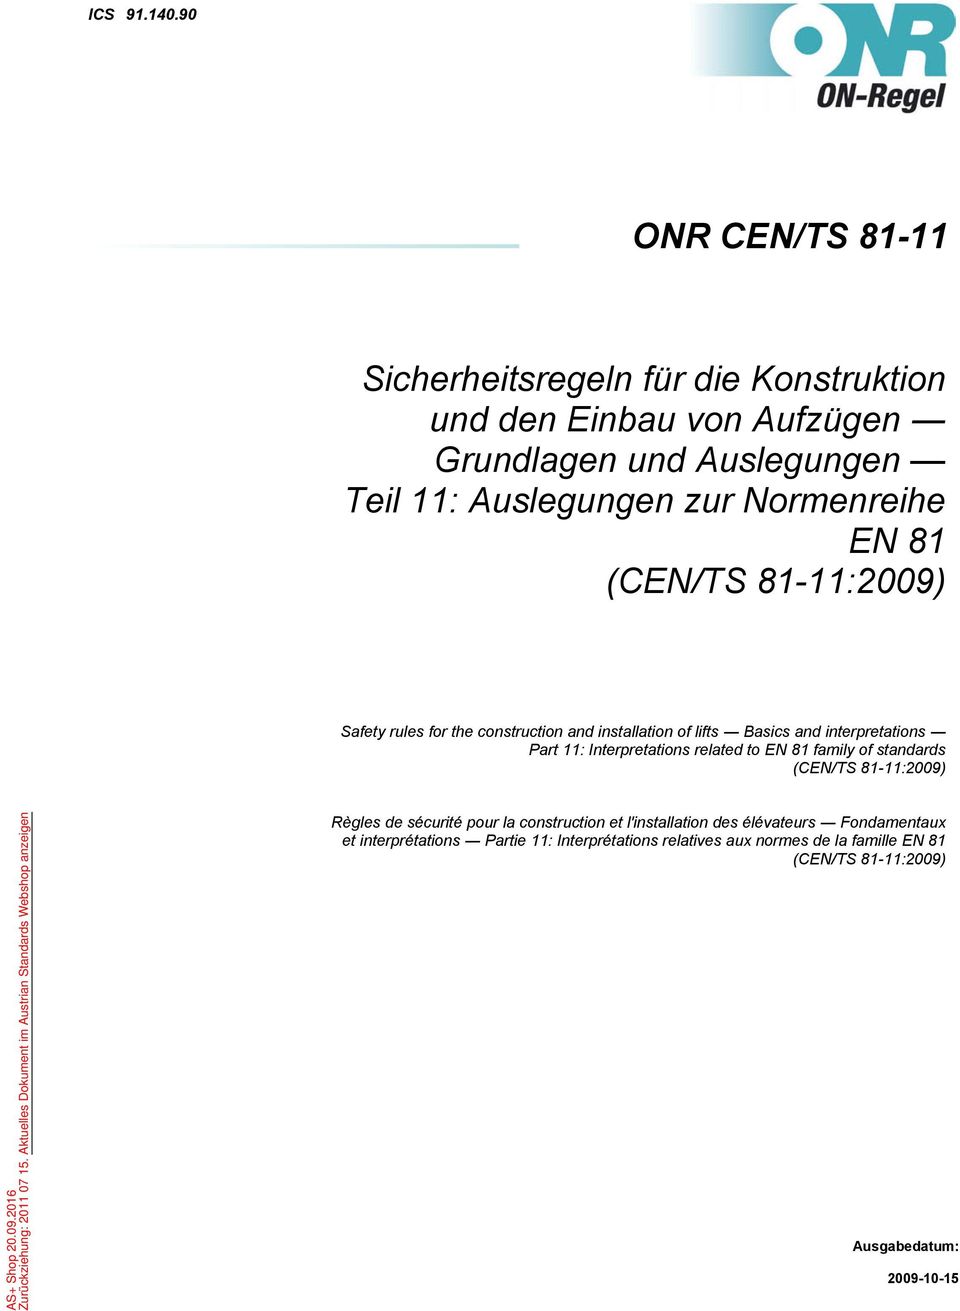 Normenreihe EN 81 (CEN/TS 81-11:2009) Safety rules for the construction and installation of lifts Basics and interpretations Part 11: